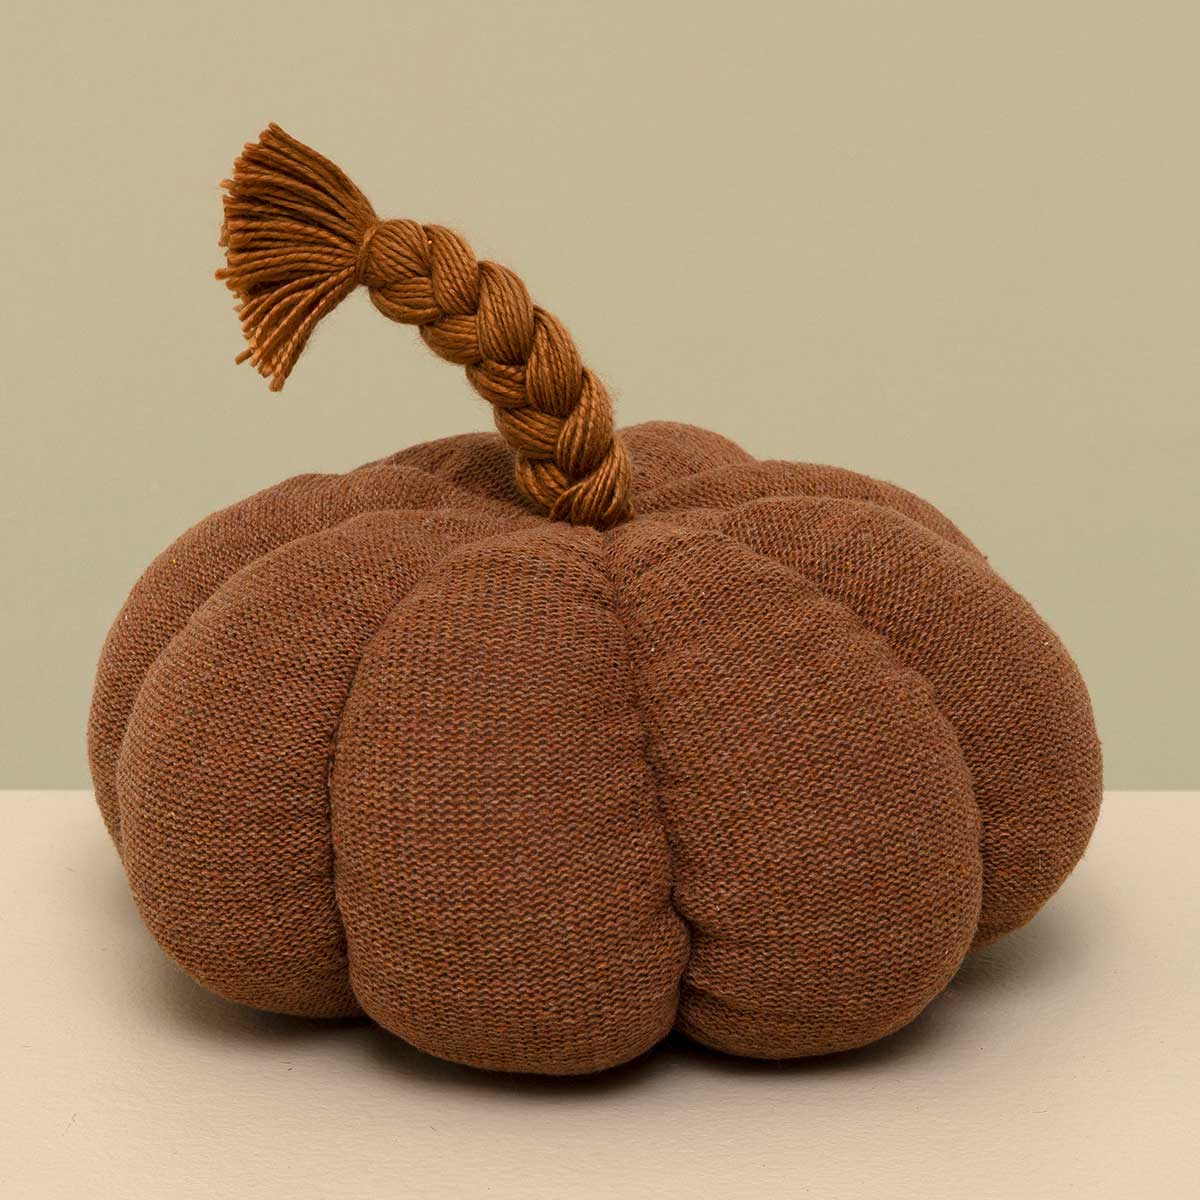 KNIT PUMPKIN PLUSH CLAY WITH BRAIDED STEM EXTRA LARGE